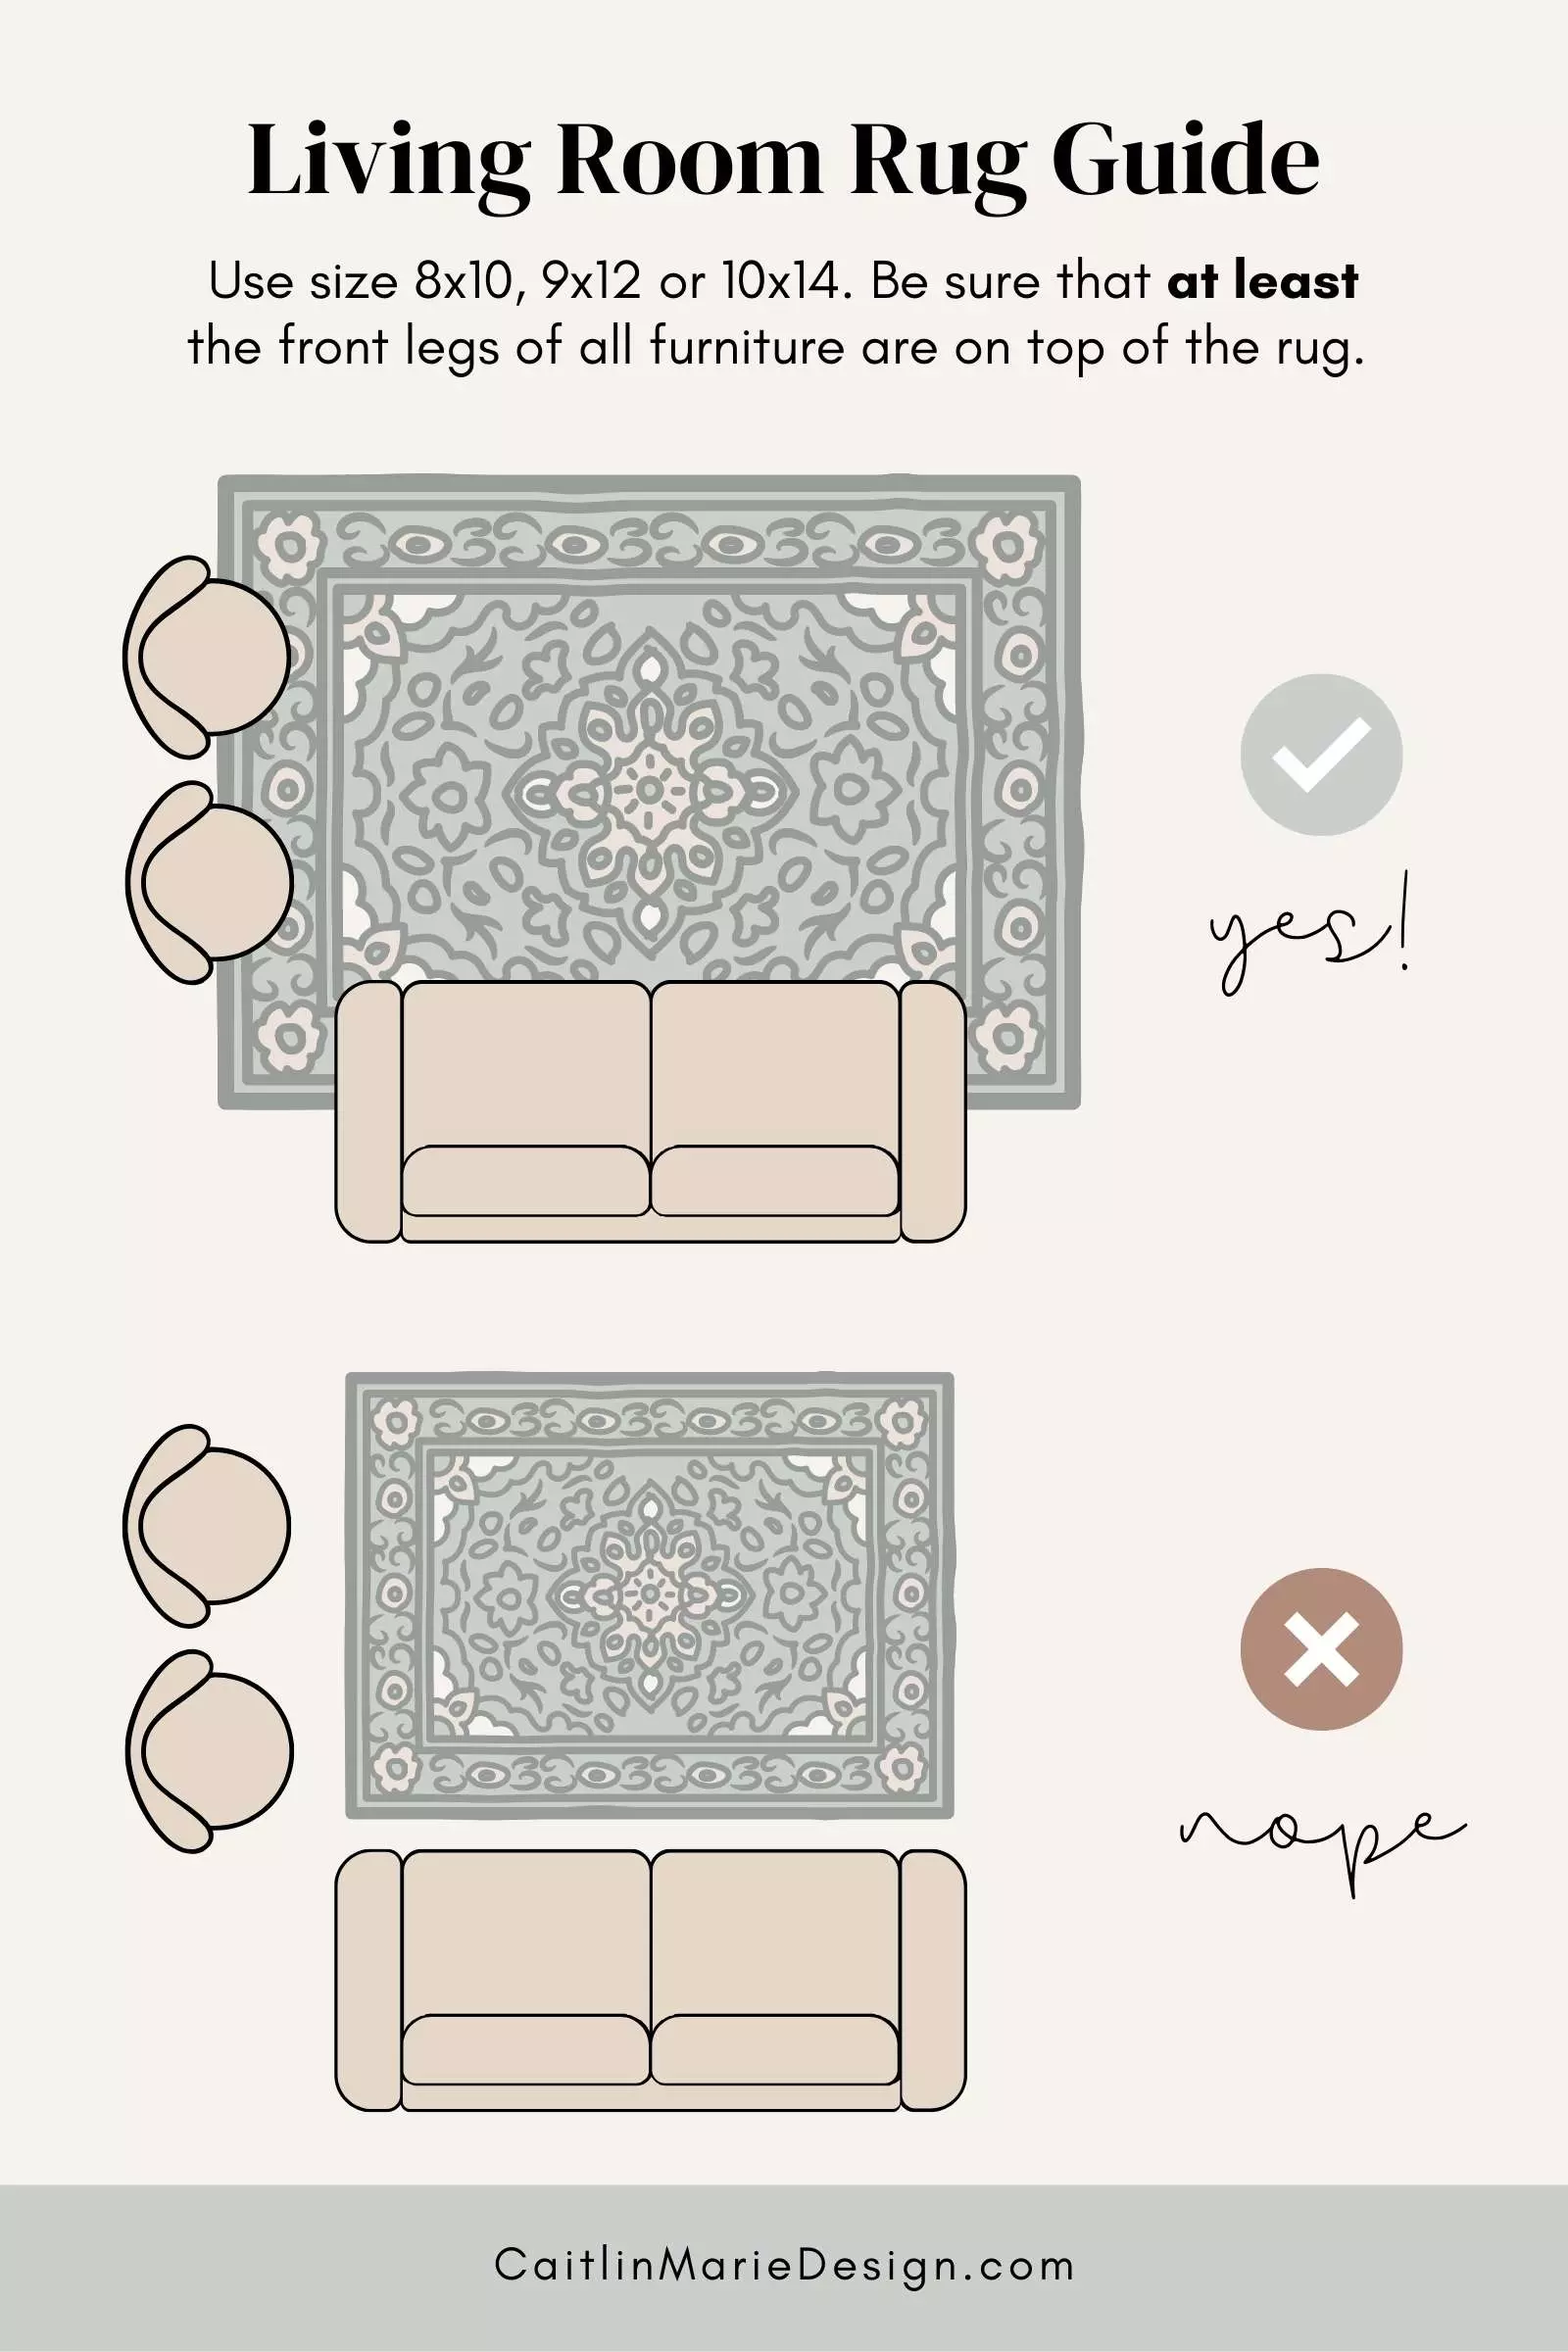 Living Room Rug Size Guide for a Couch and Chairs: Use size 8×10, 9×12, or 10×14. Be sure that at least the front legs of all furniture are on top of the rug.